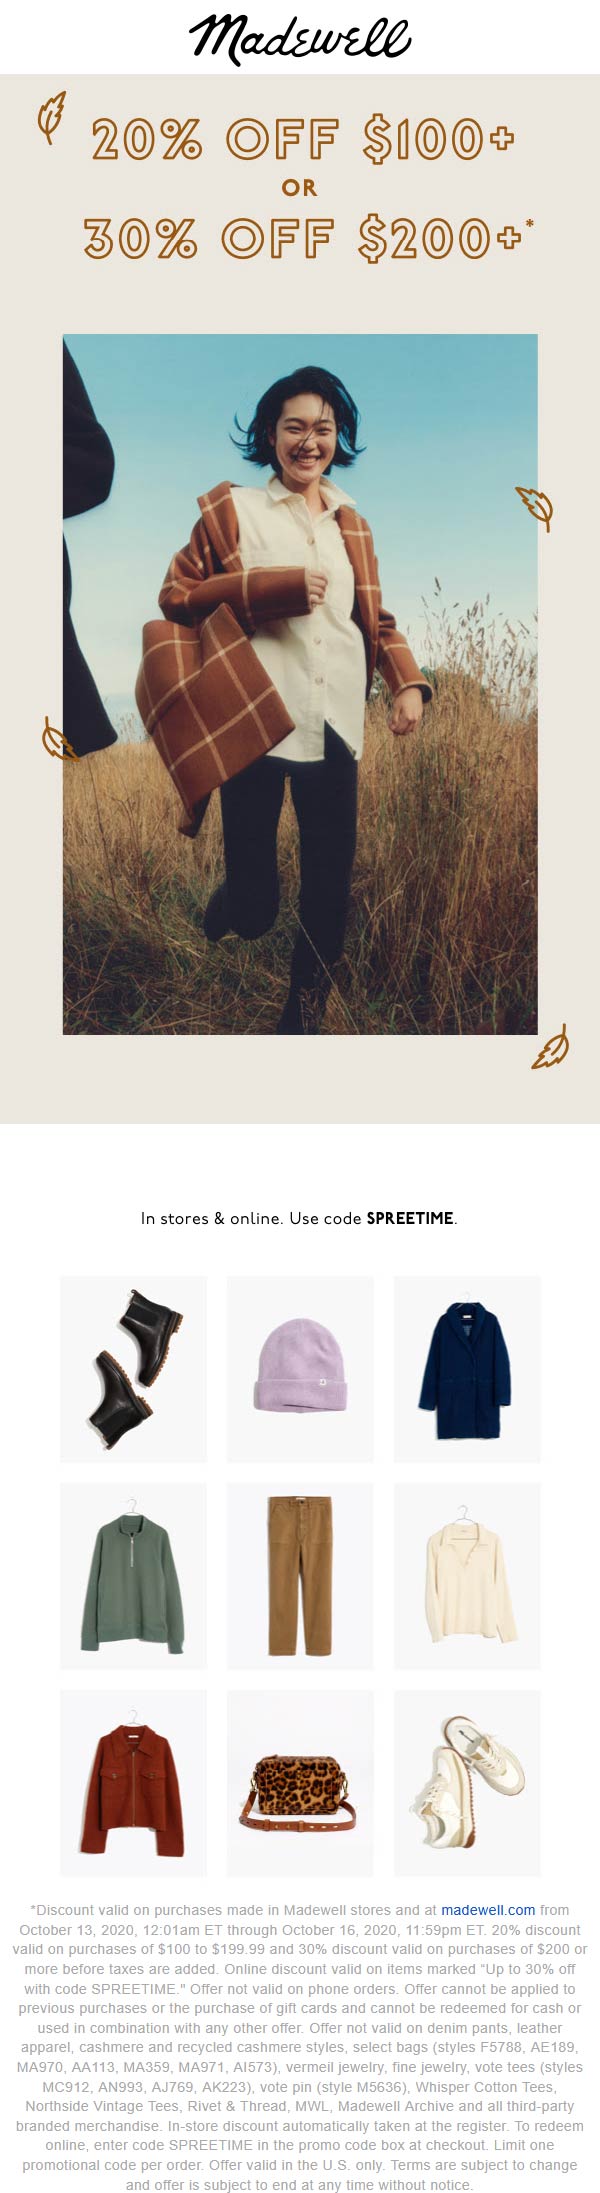 2030 off 100+ at Madewell, or online via promo code SPREETIME 